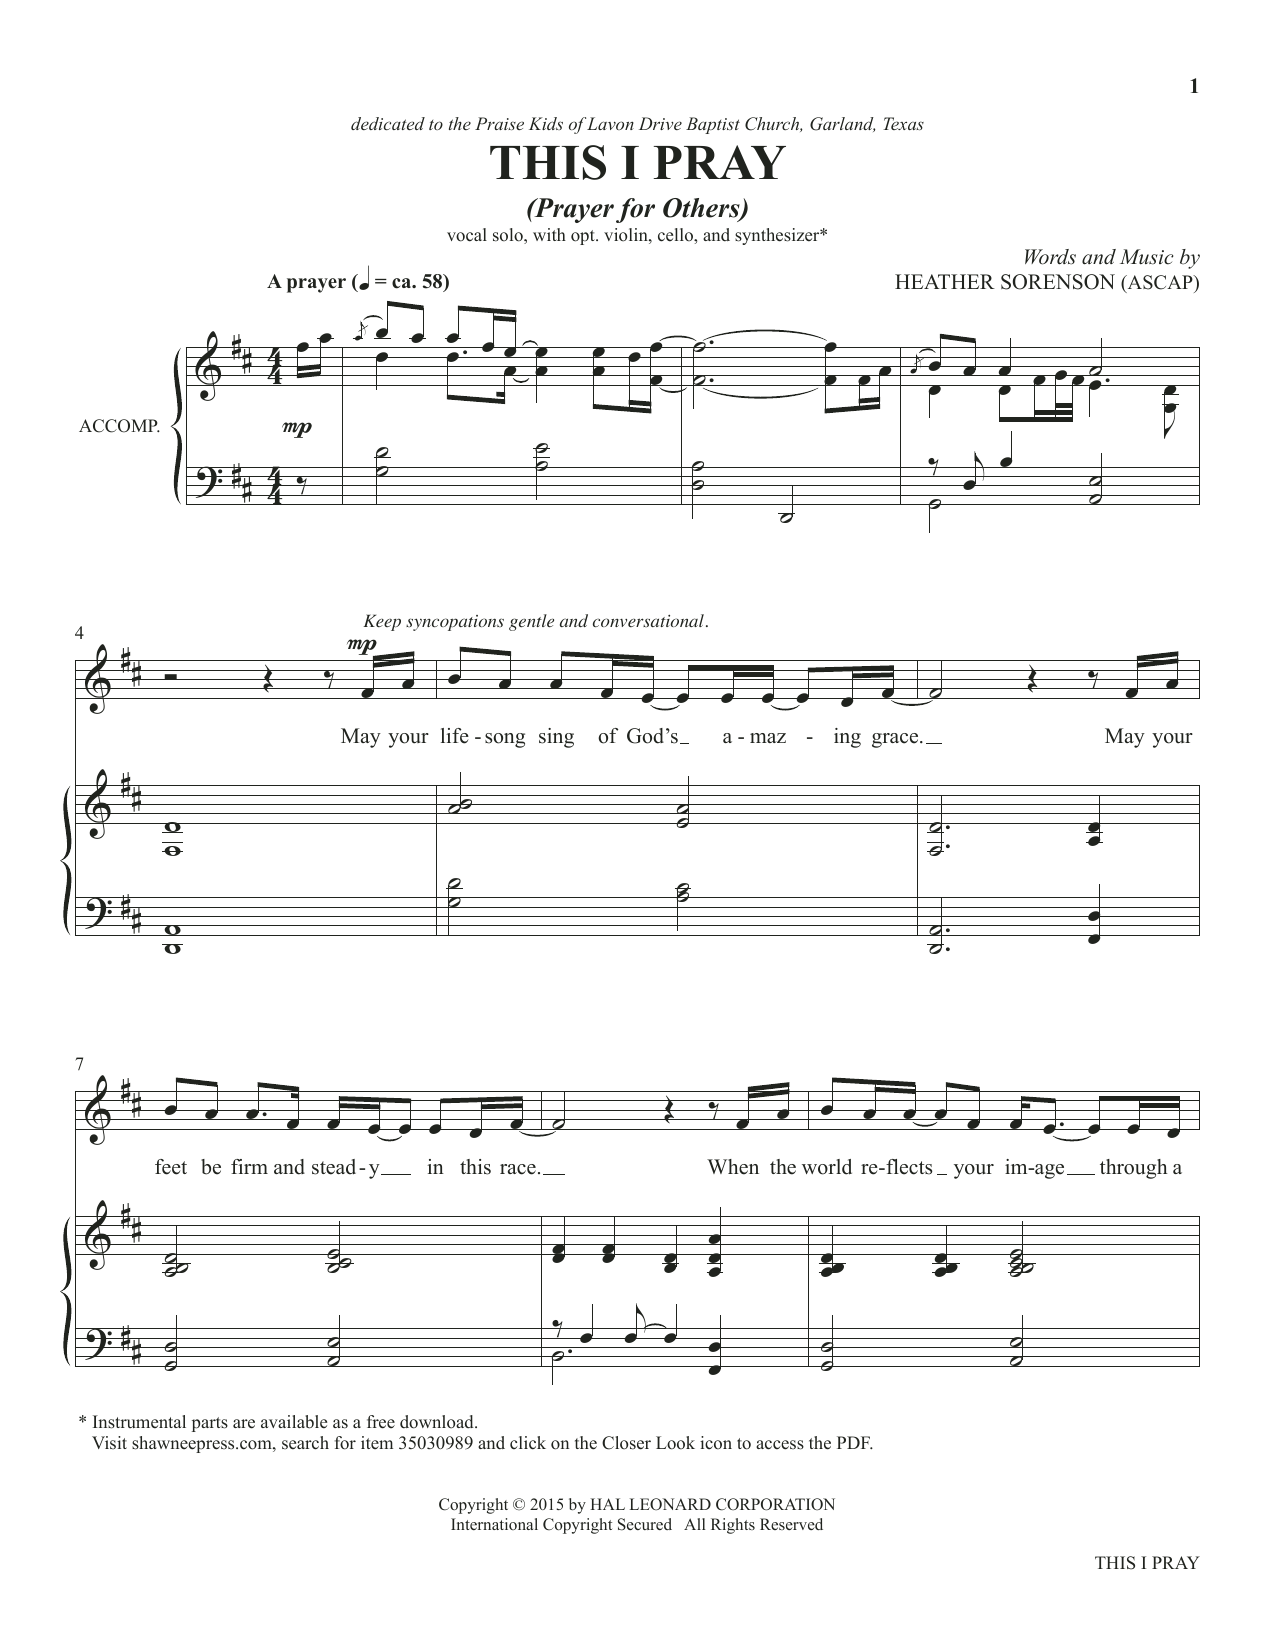 Download Heather Sorenson The Prayer Project (Collection) Sheet Music